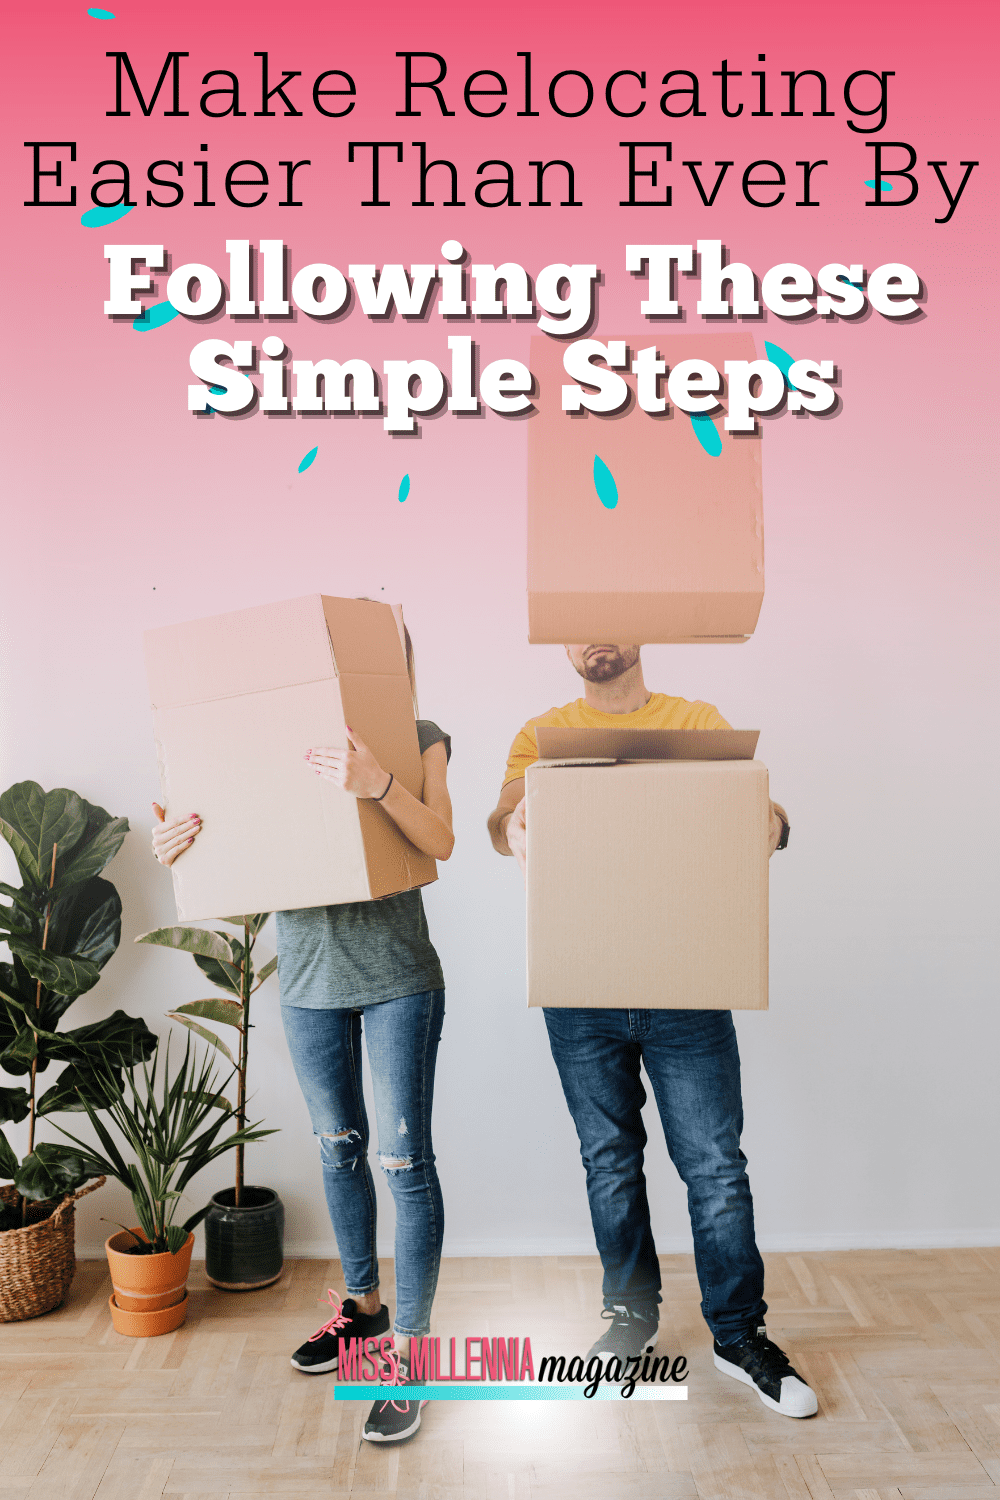 Make Relocating Easier Than Ever By Following These Simple Steps